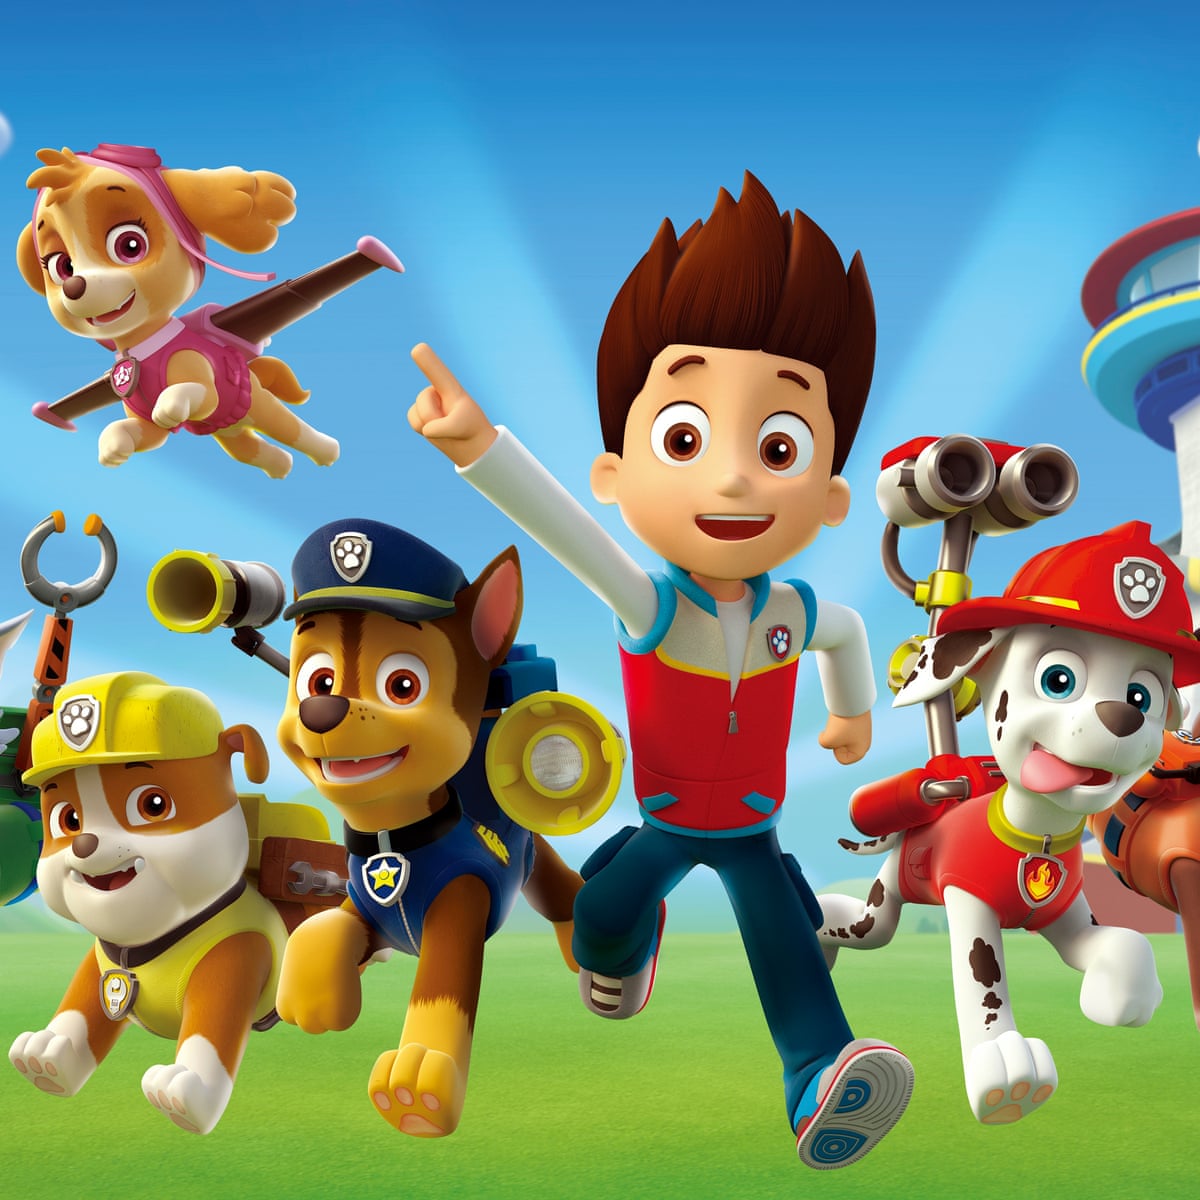 Paw Patrol: the megalomaniacal kids' TV show that's ruining my life |  Children's TV | The Guardian